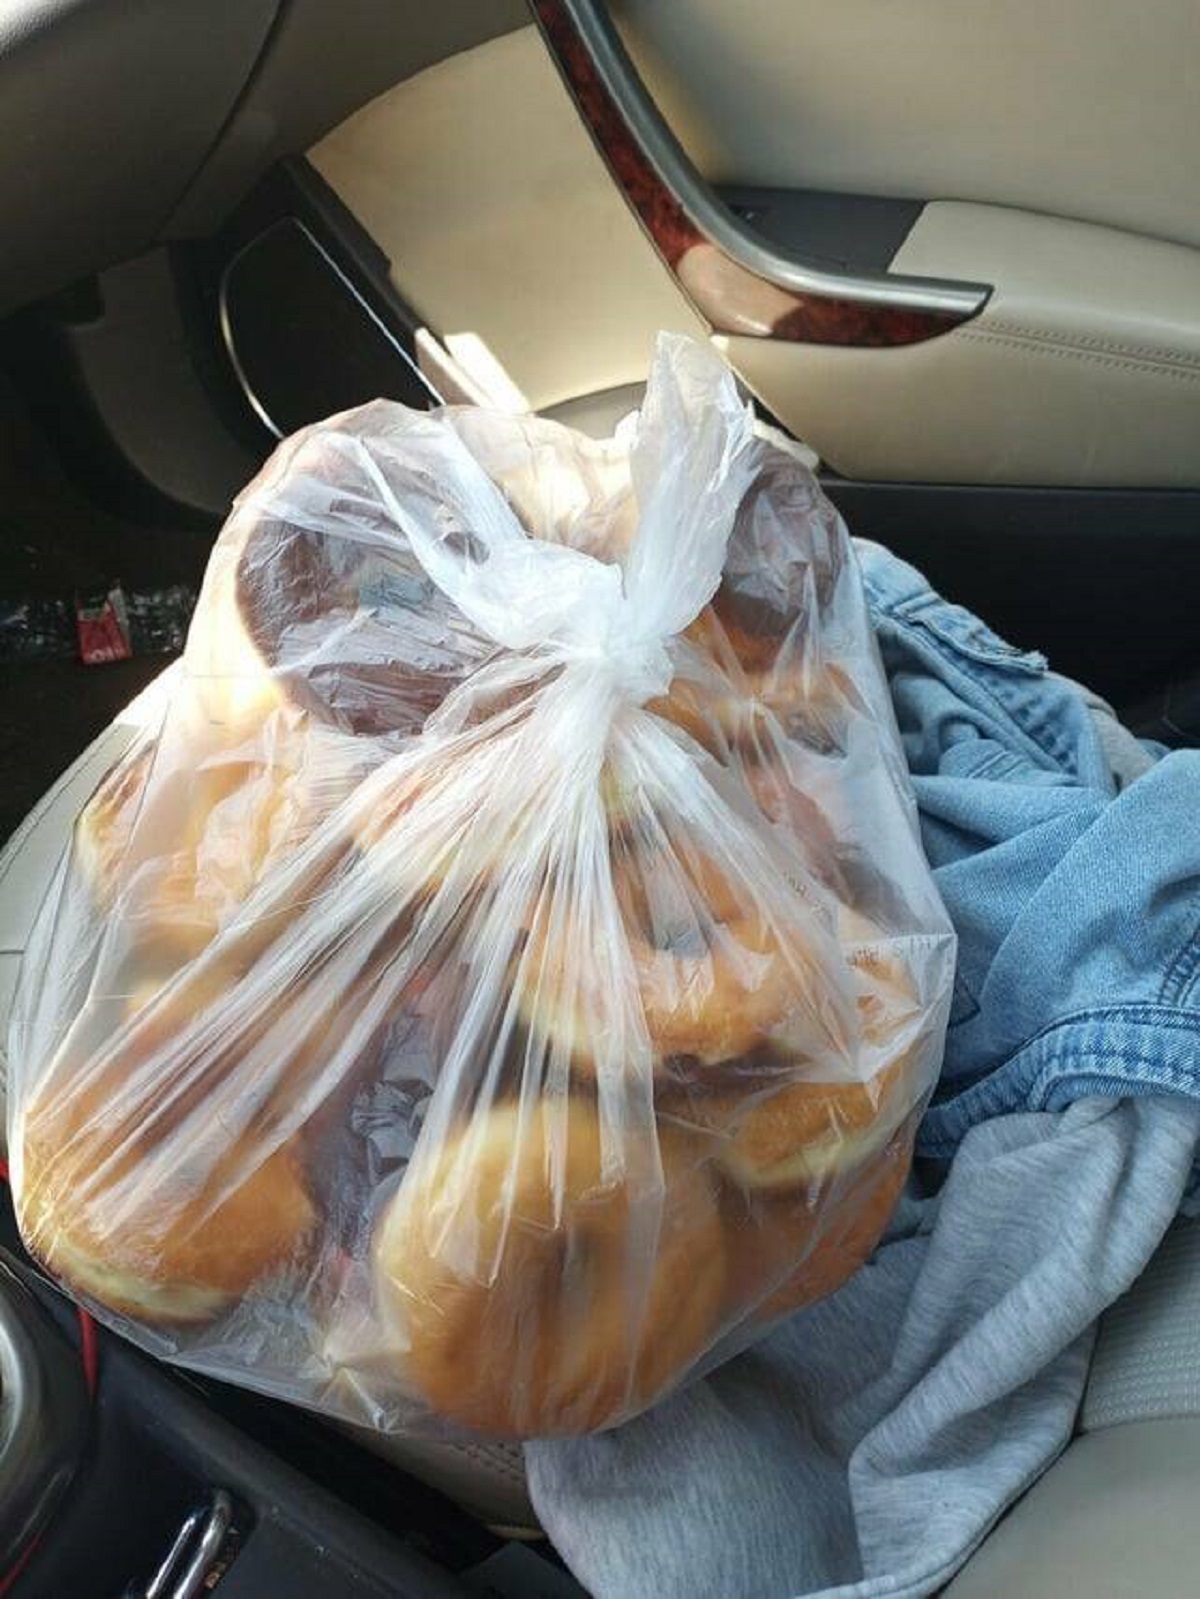 "I accidentally walked into a donut shop as they were getting ready to close and received a bag of donuts for free"